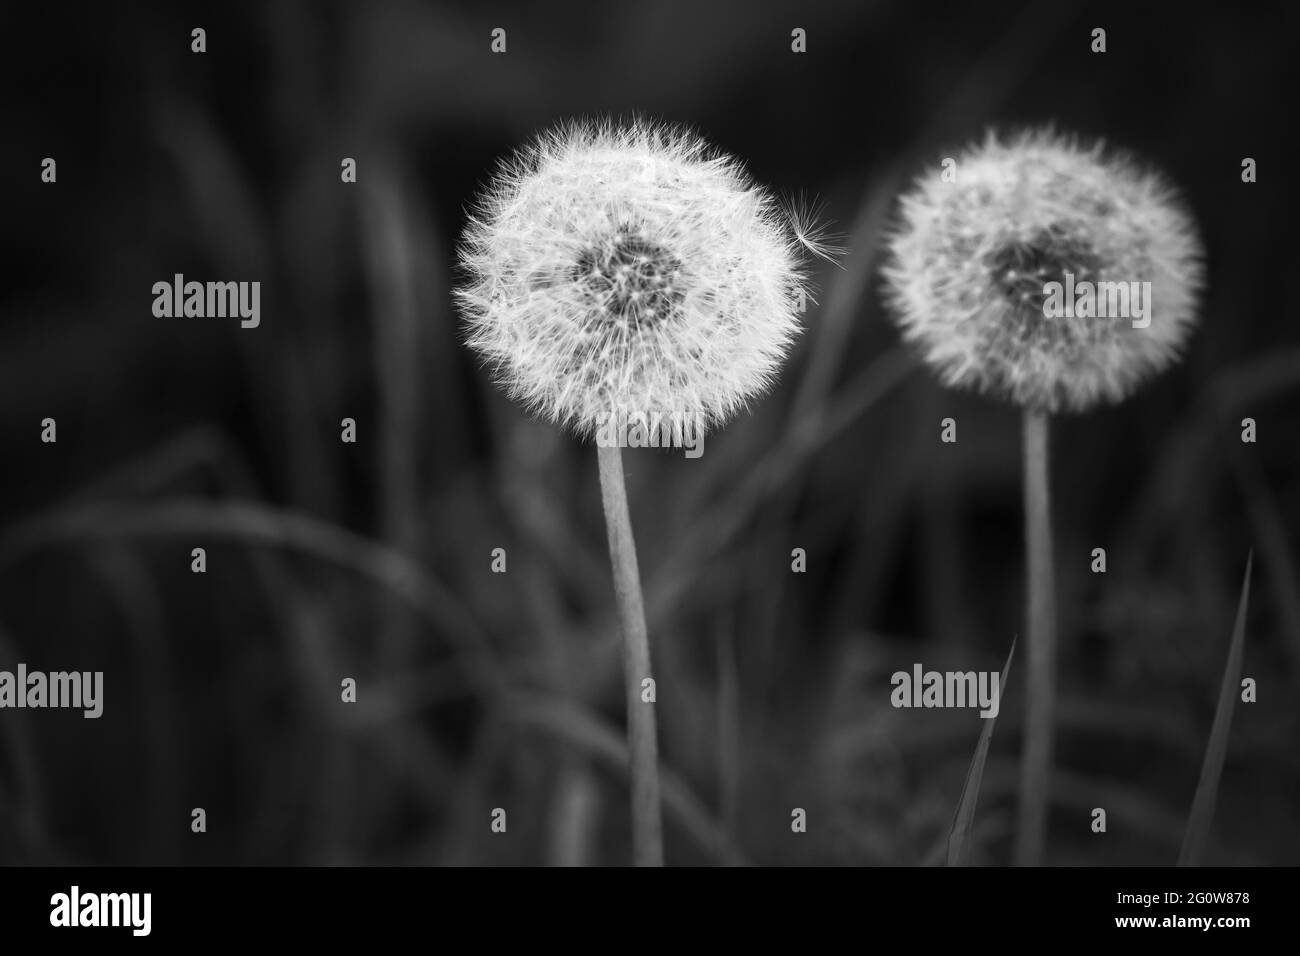 Dandelion flowers with fluffy seed heads, black and white photo Stock Photo